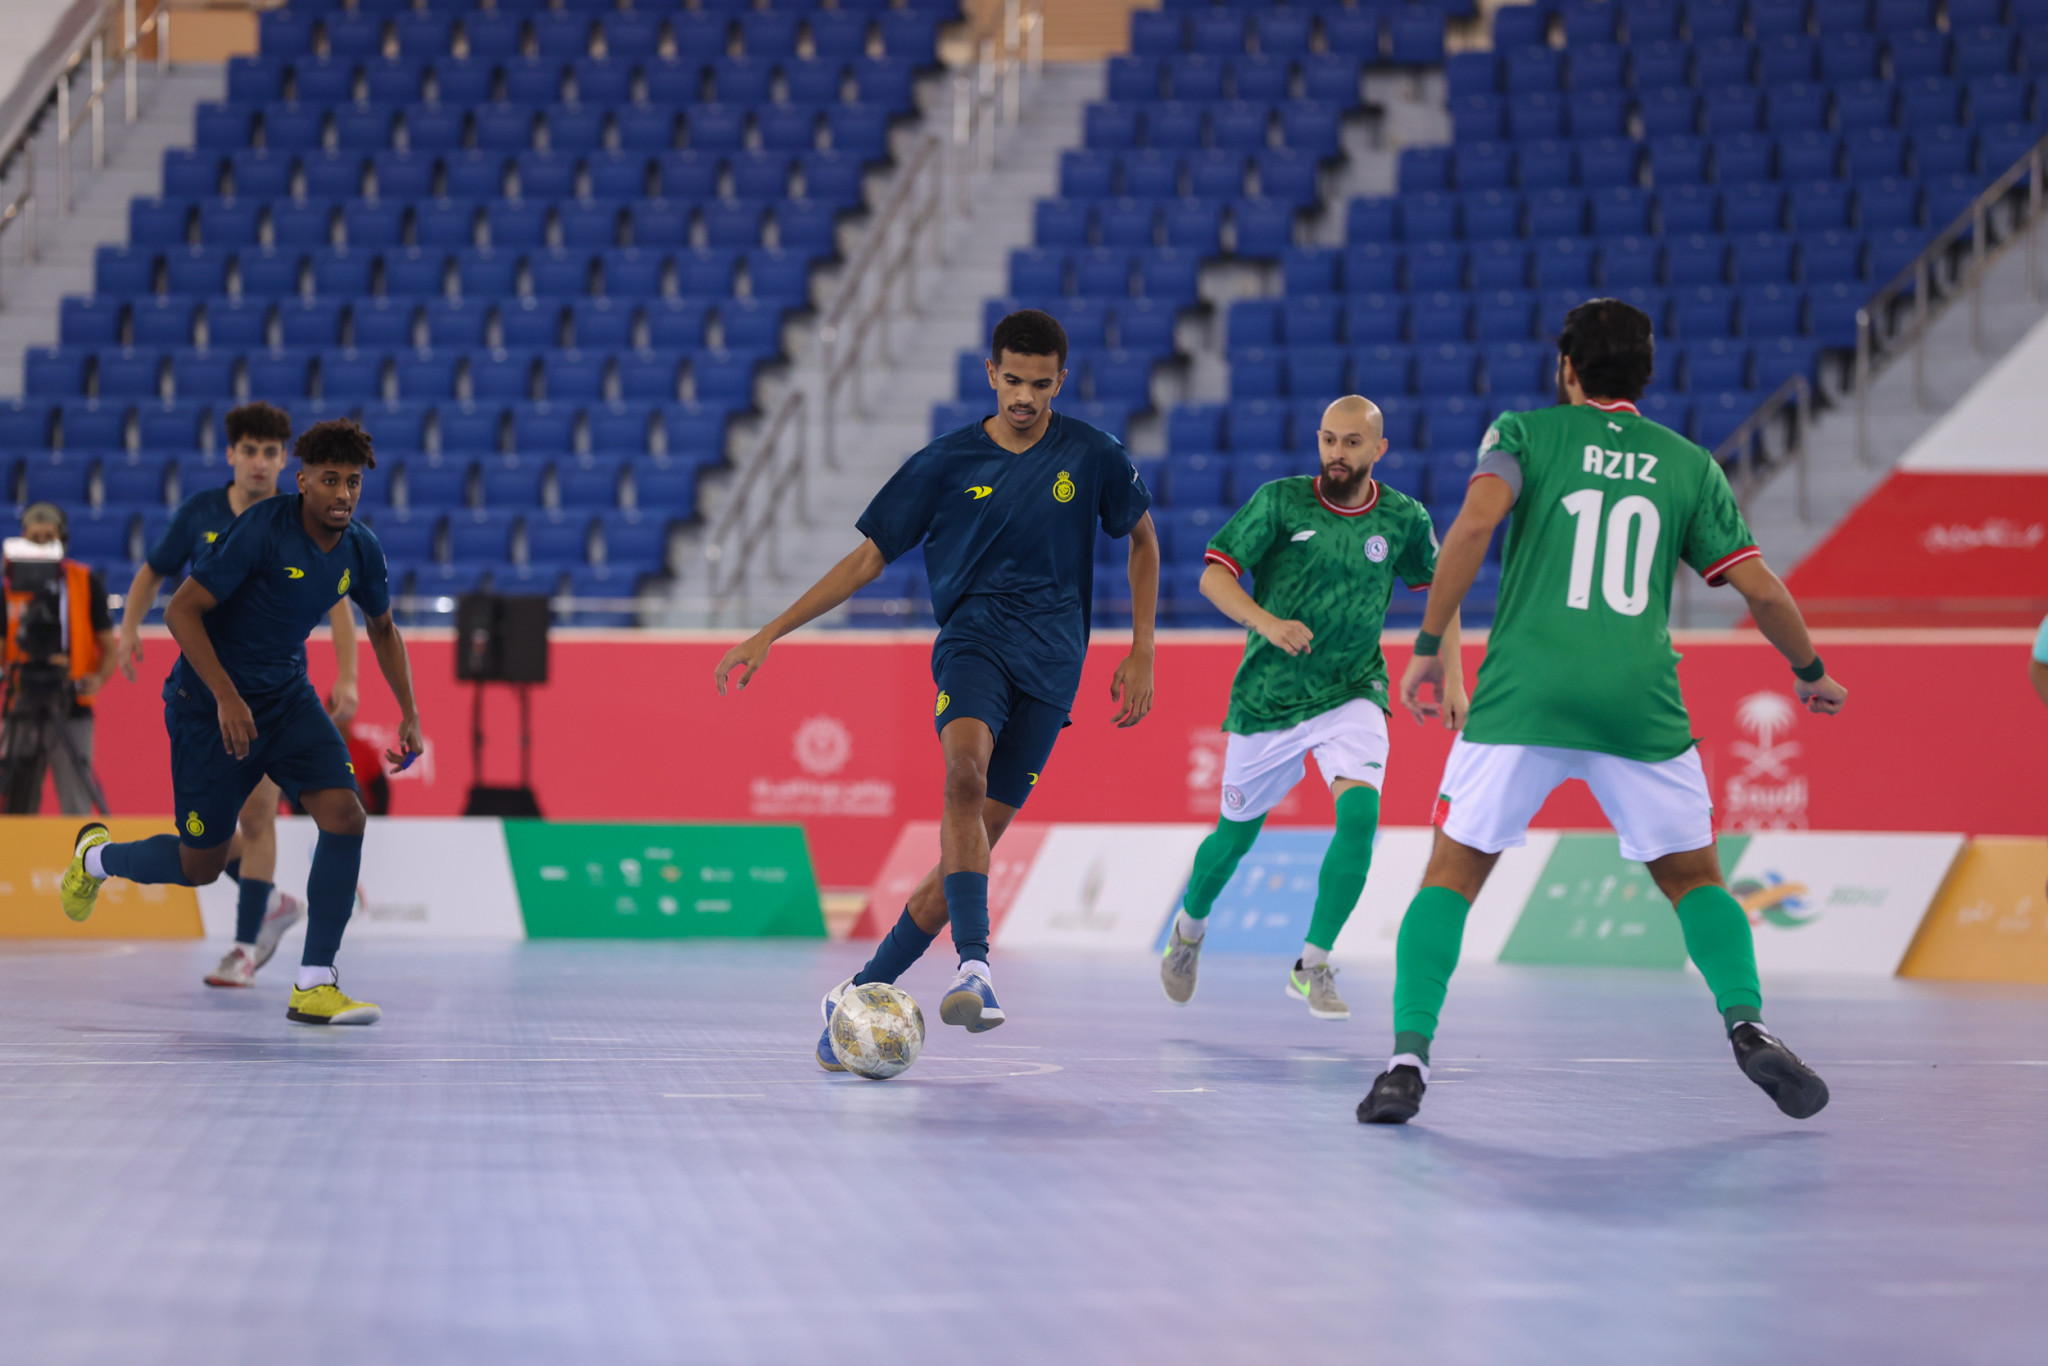 Saudi Games: Day 10 of competition